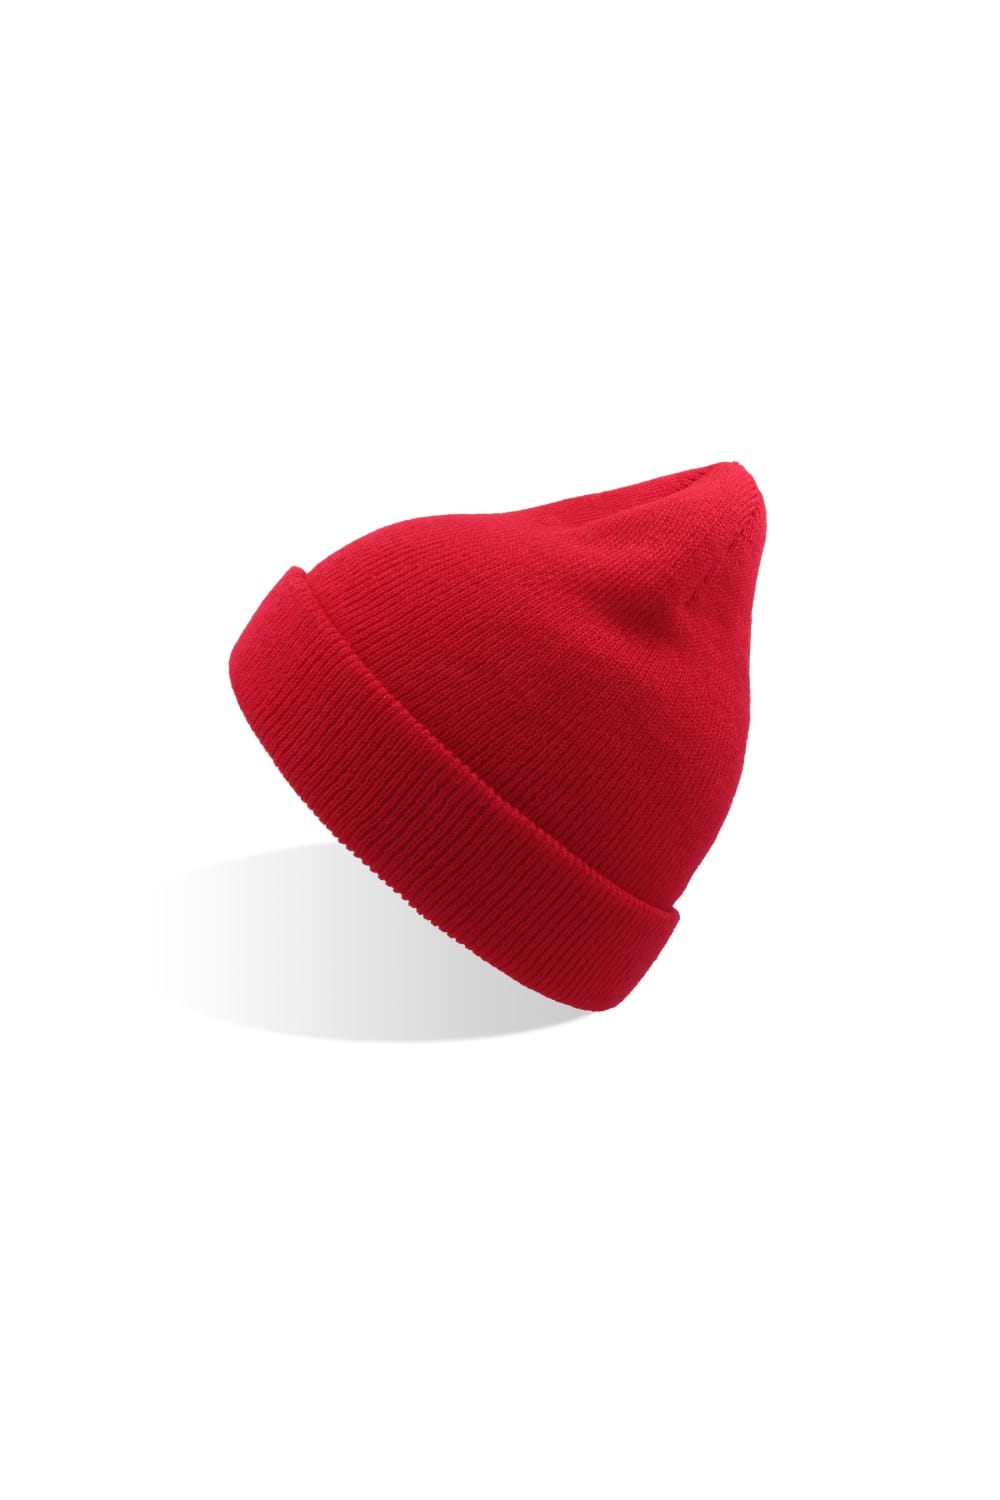 Wind Childrens/Kids Double Skin Beanie With Turn Up - Red